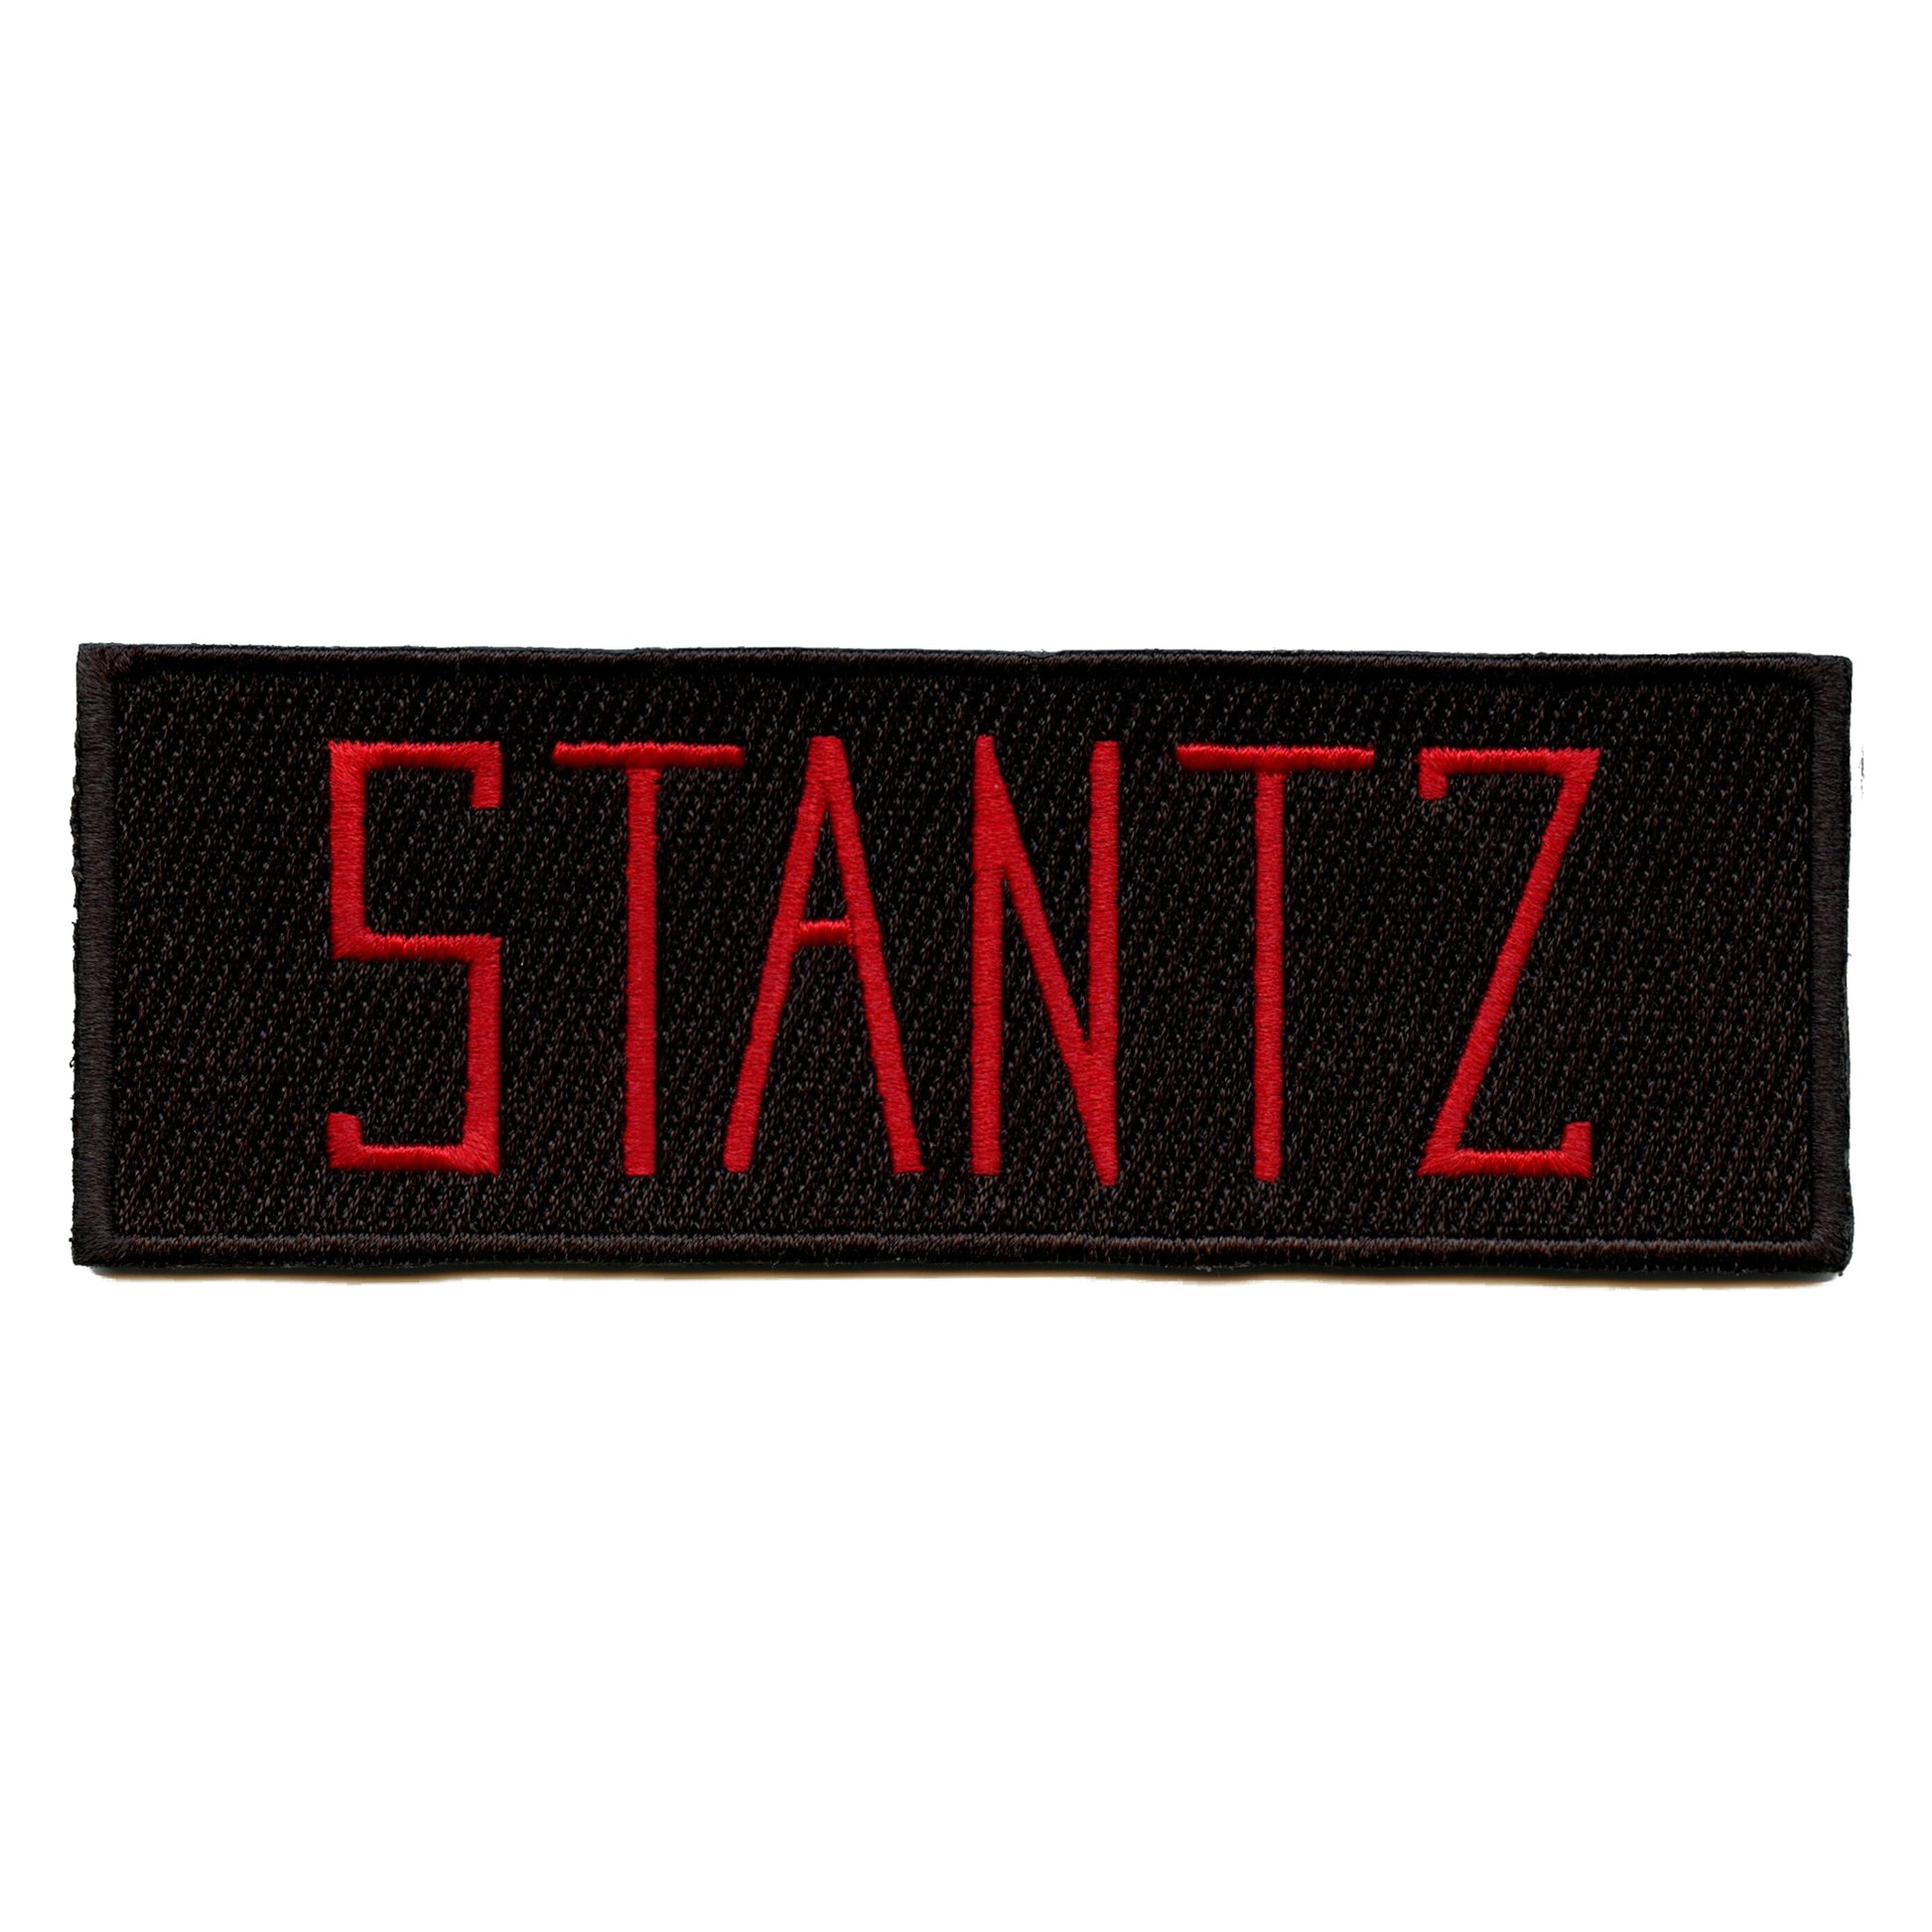 Stantz Name Tag Patch Costume Embroidered Iron On